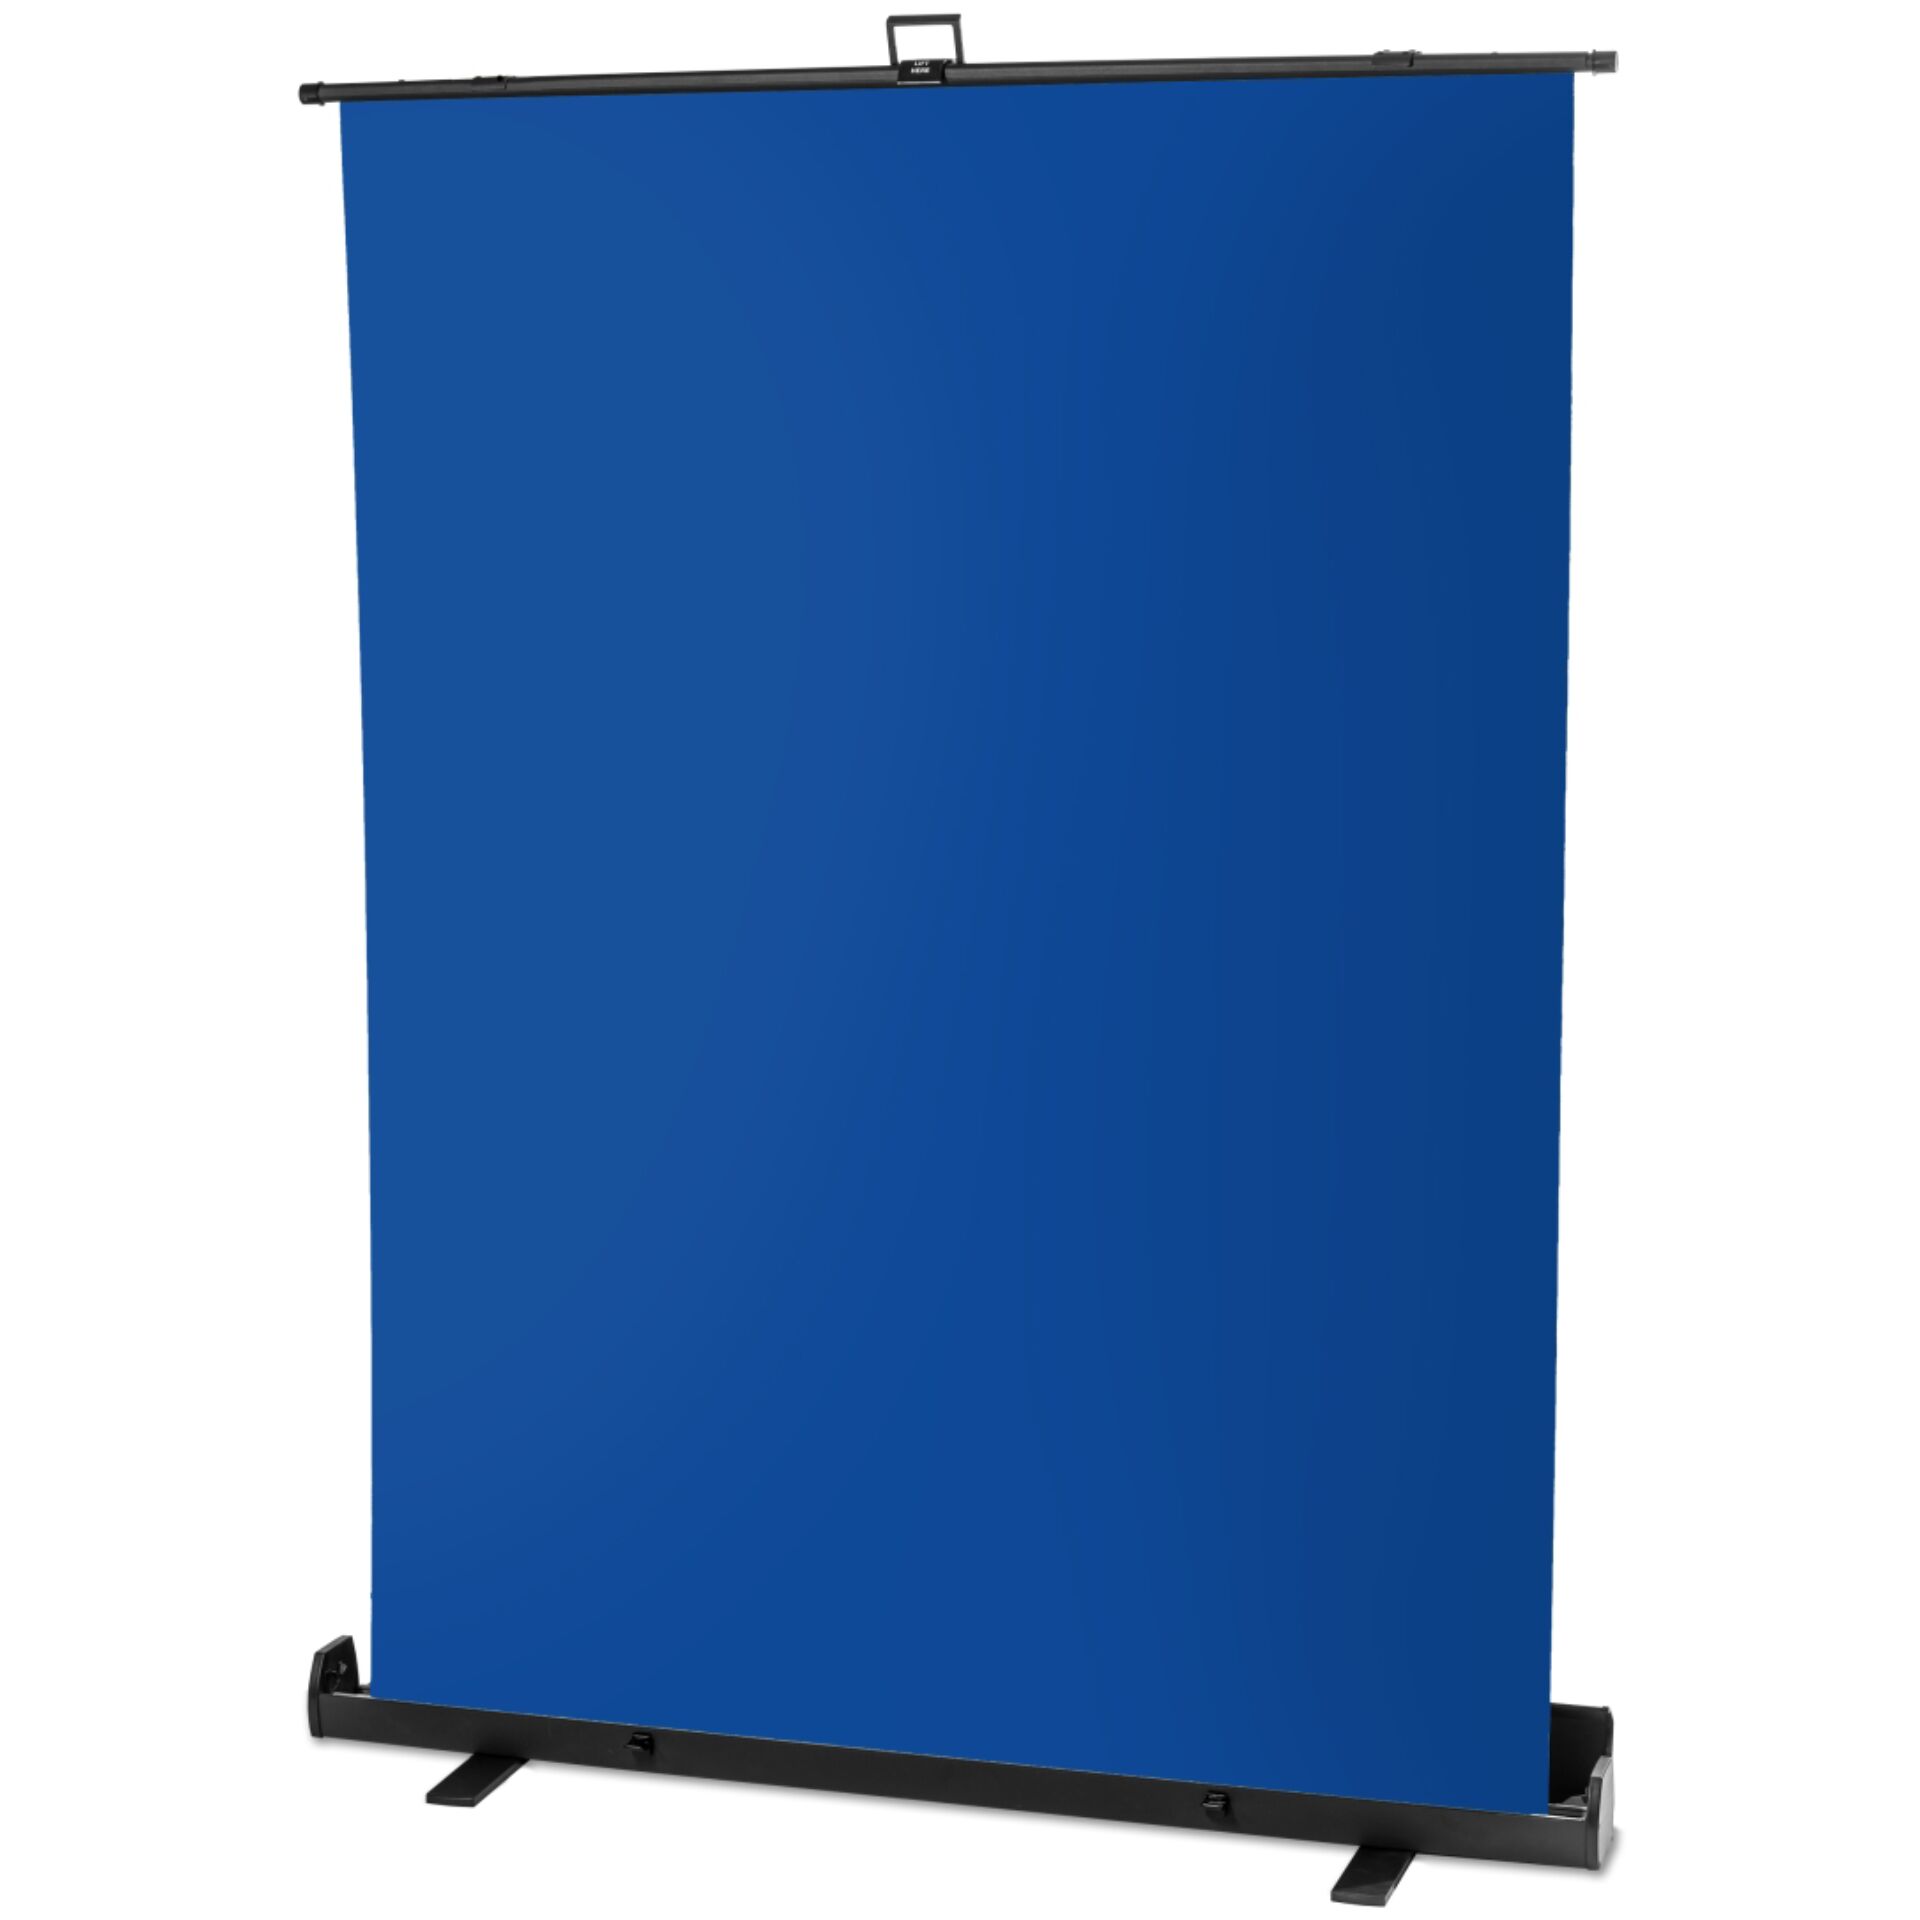 Walimex pro Roll-up Panel Background 155x200cm blue